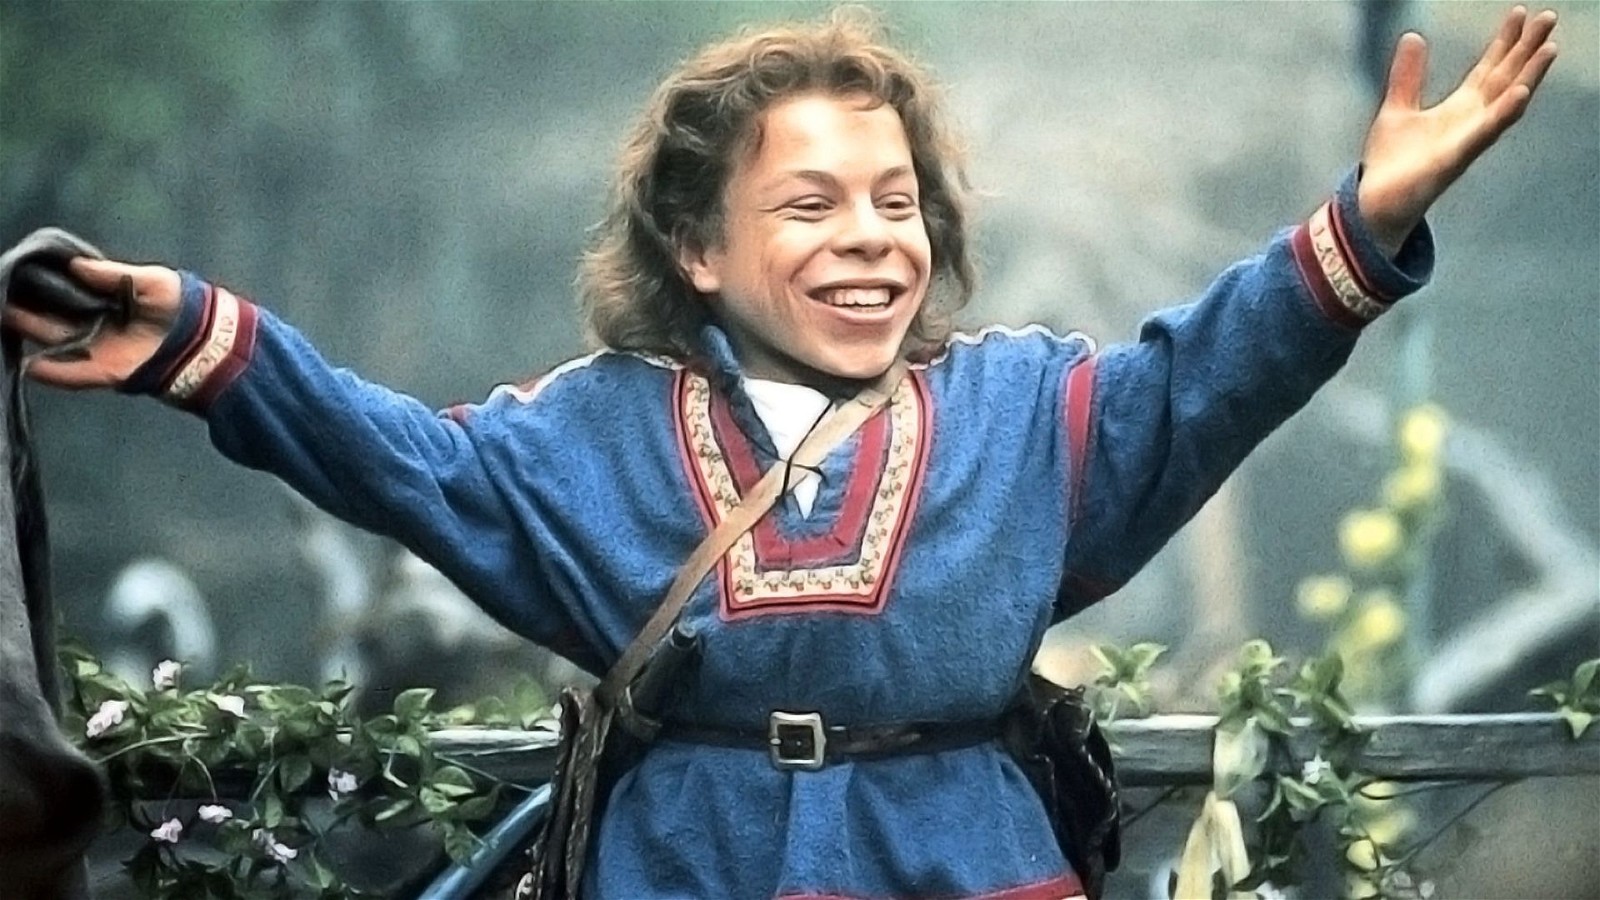 Warwick Davis will reprise his role in Willow.